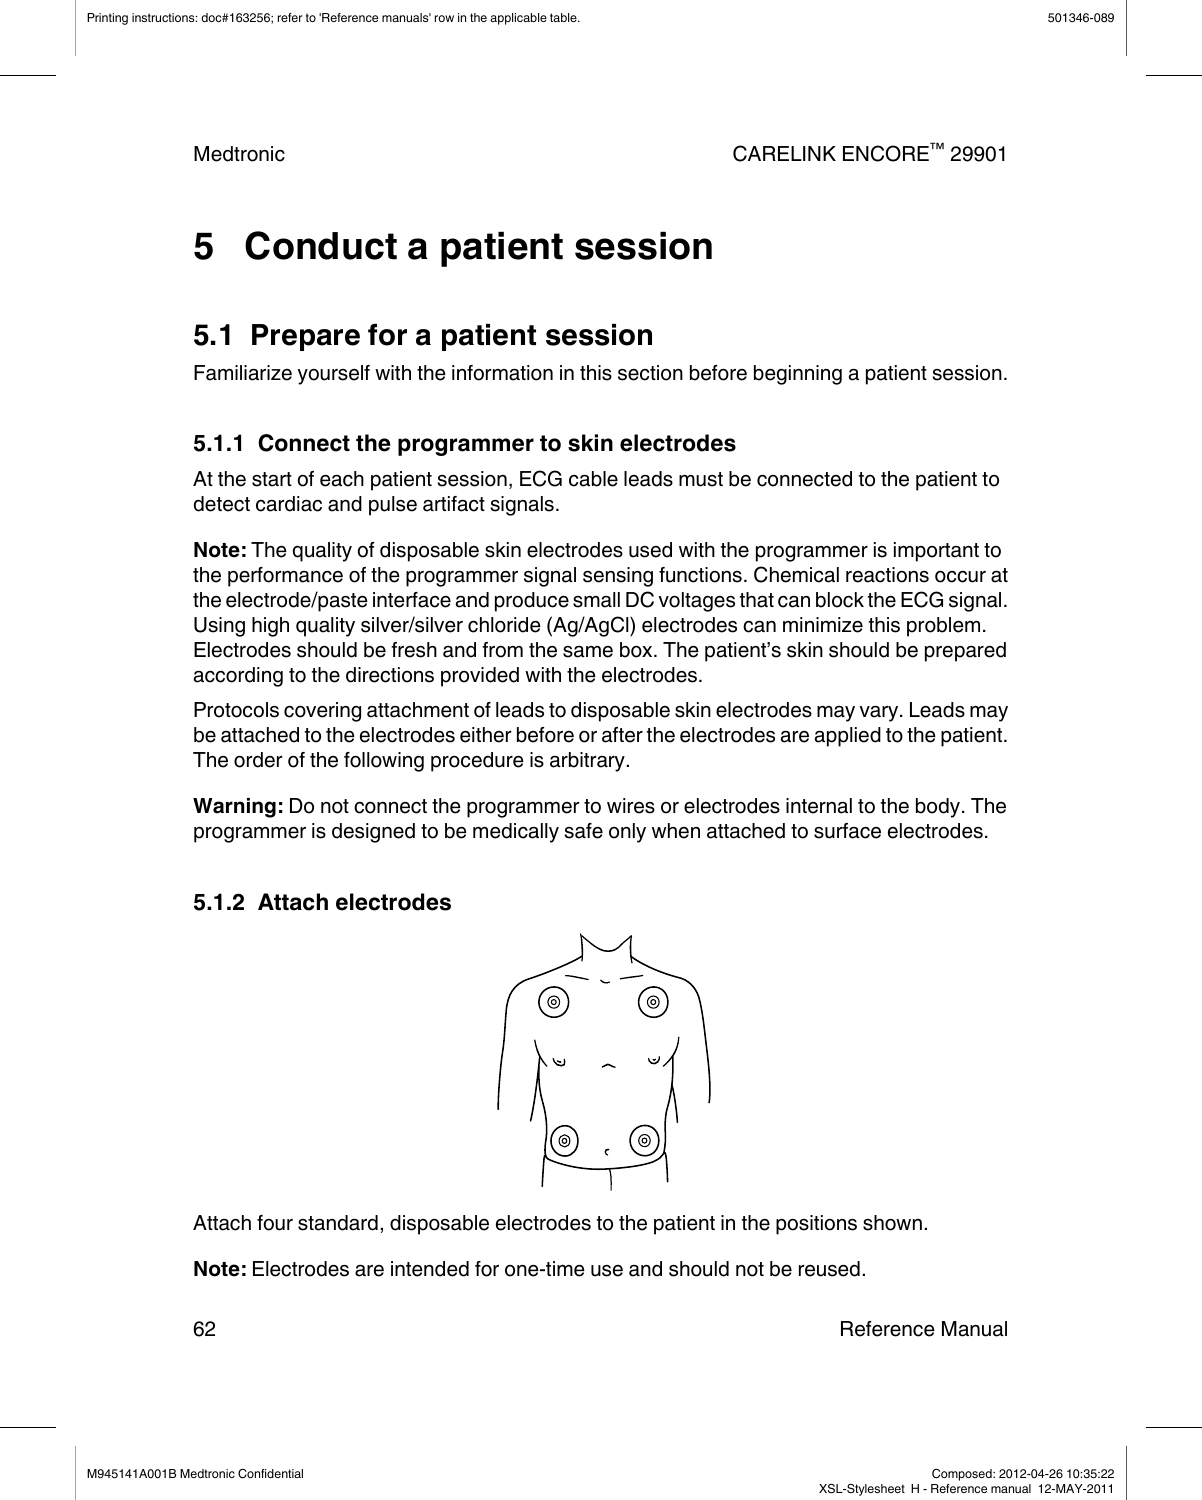 5   Conduct a patient session5.1  Prepare for a patient sessionFamiliarize yourself with the information in this section before beginning a patient session.5.1.1  Connect the programmer to skin electrodesAt the start of each patient session, ECG cable leads must be connected to the patient todetect cardiac and pulse artifact signals.Note: The quality of disposable skin electrodes used with the programmer is important tothe performance of the programmer signal sensing functions. Chemical reactions occur atthe electrode/paste interface and produce small DC voltages that can block the ECG signal.Using high quality silver/silver chloride (Ag/AgCl) electrodes can minimize this problem.Electrodes should be fresh and from the same box. The patient’s skin should be preparedaccording to the directions provided with the electrodes.Protocols covering attachment of leads to disposable skin electrodes may vary. Leads maybe attached to the electrodes either before or after the electrodes are applied to the patient.The order of the following procedure is arbitrary.Warning: Do not connect the programmer to wires or electrodes internal to the body. Theprogrammer is designed to be medically safe only when attached to surface electrodes.5.1.2  Attach electrodesAttach four standard, disposable electrodes to the patient in the positions shown.Note: Electrodes are intended for one-time use and should not be reused.Printing instructions: doc#163256; refer to &apos;Reference manuals&apos; row in the applicable table. 501346-089Medtronic CARELINK ENCORE™ 2990162 Reference ManualM945141A001B Medtronic Confidential   Composed: 2012-04-26 10:35:22XSL-Stylesheet  H - Reference manual  12-MAY-2011